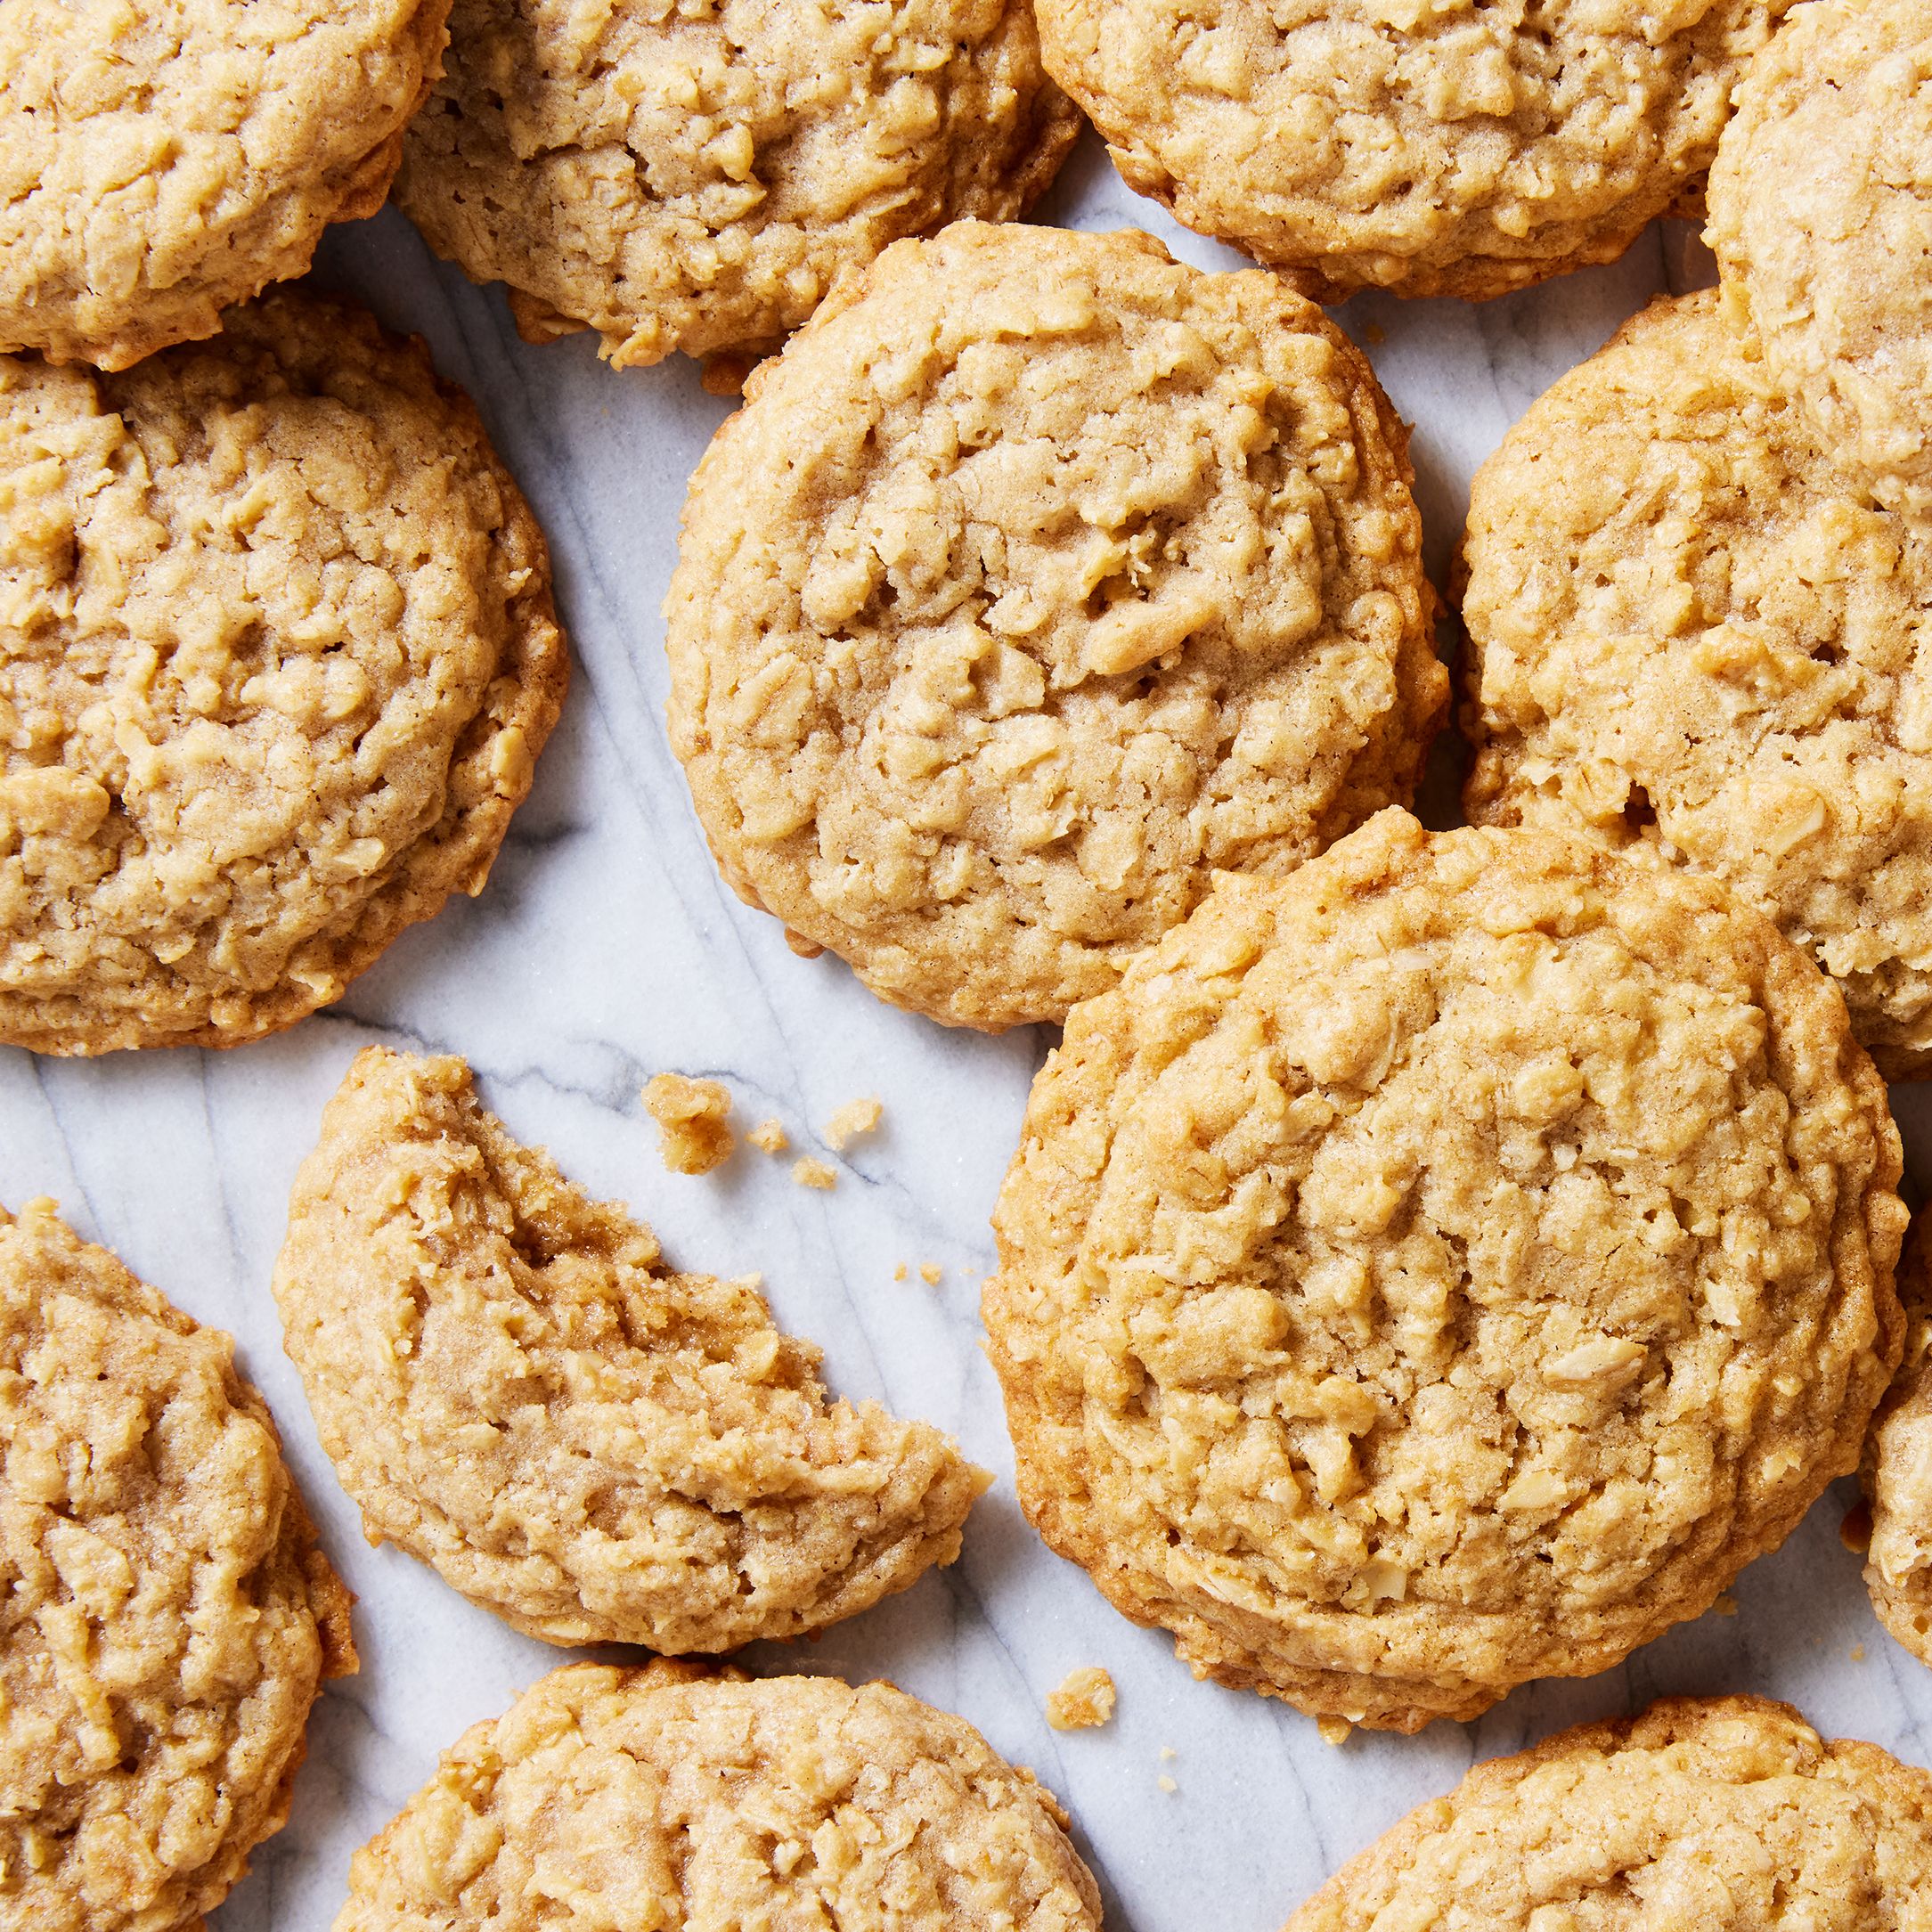 Why You Need a KitchenAid Mixer + My Favorite Oatmeal Cookie Recipe